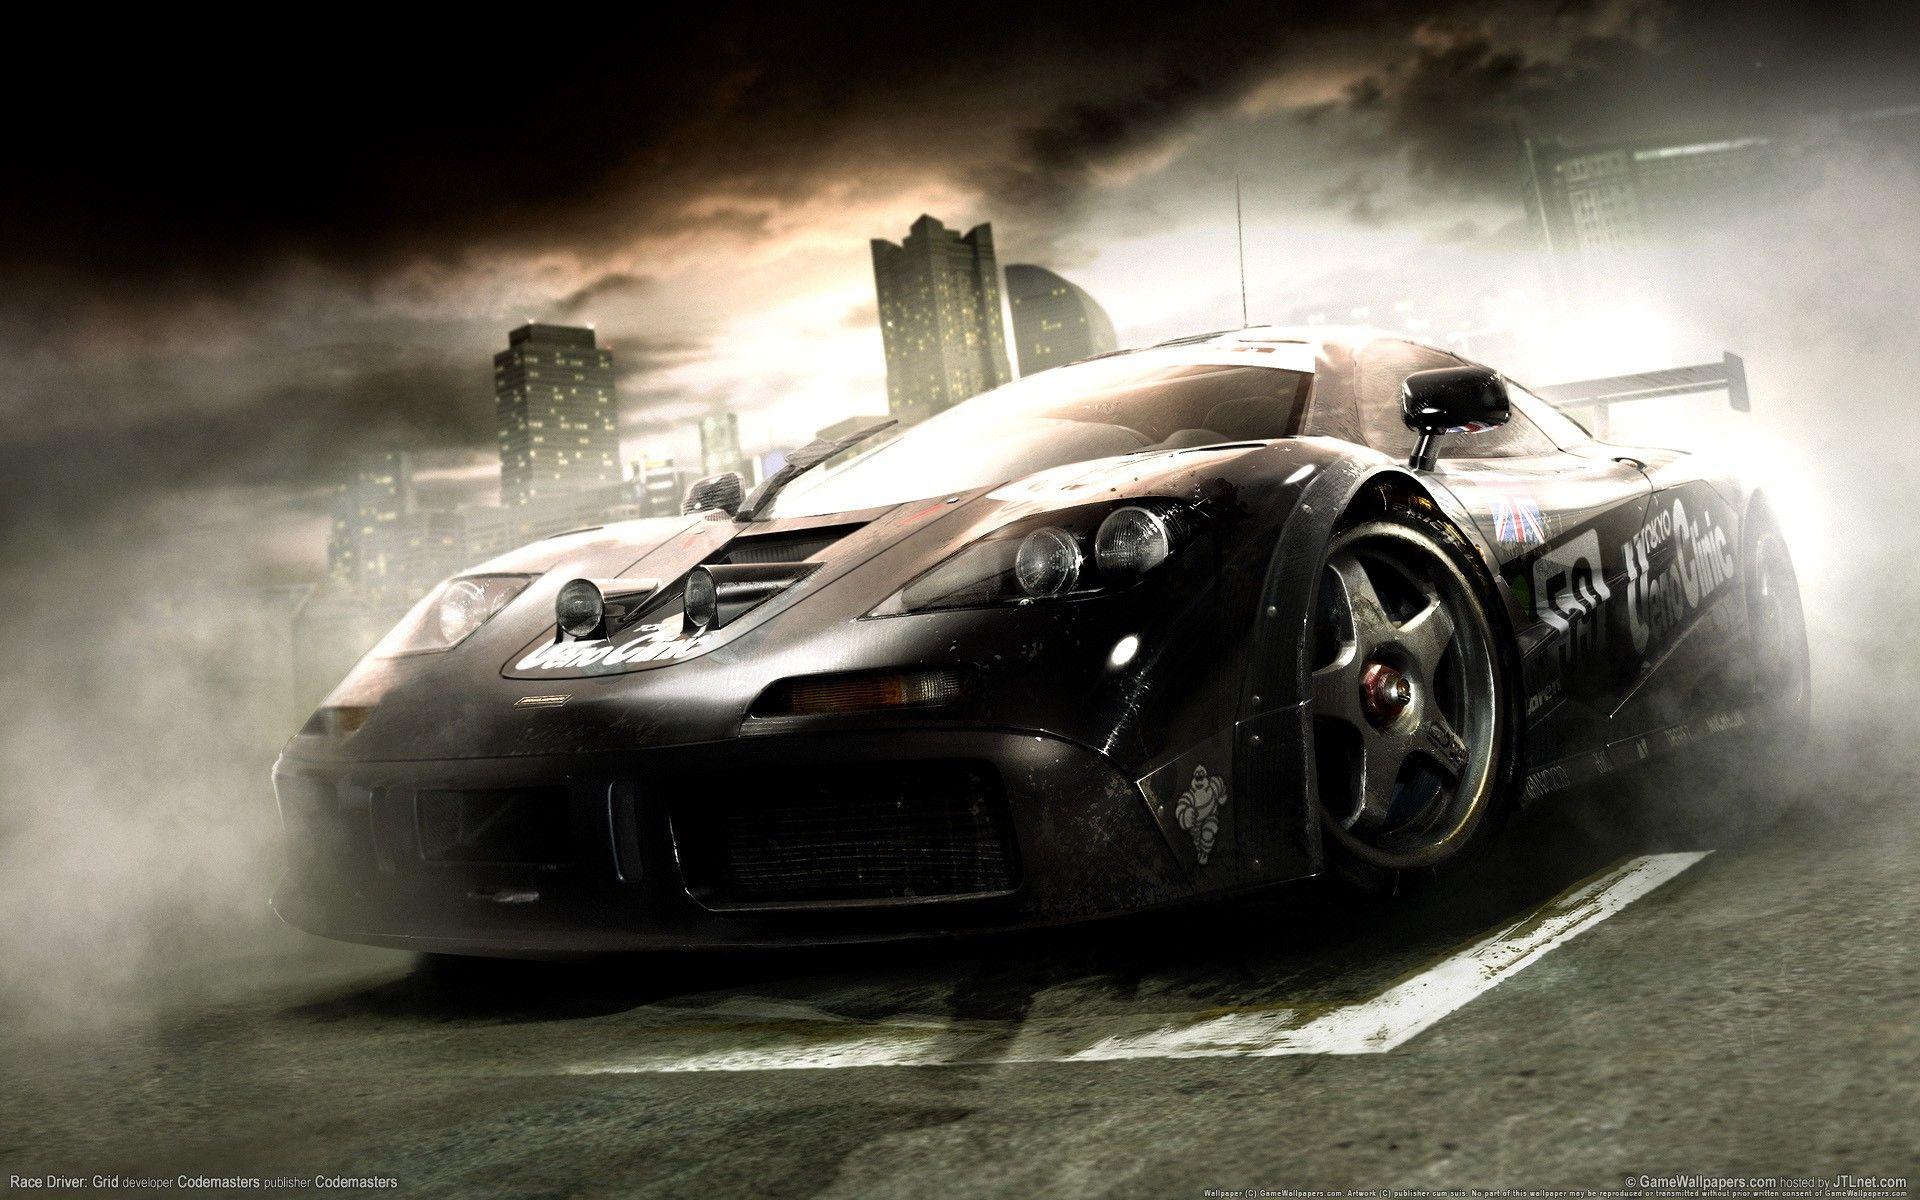 Car Games Images Wallpapers